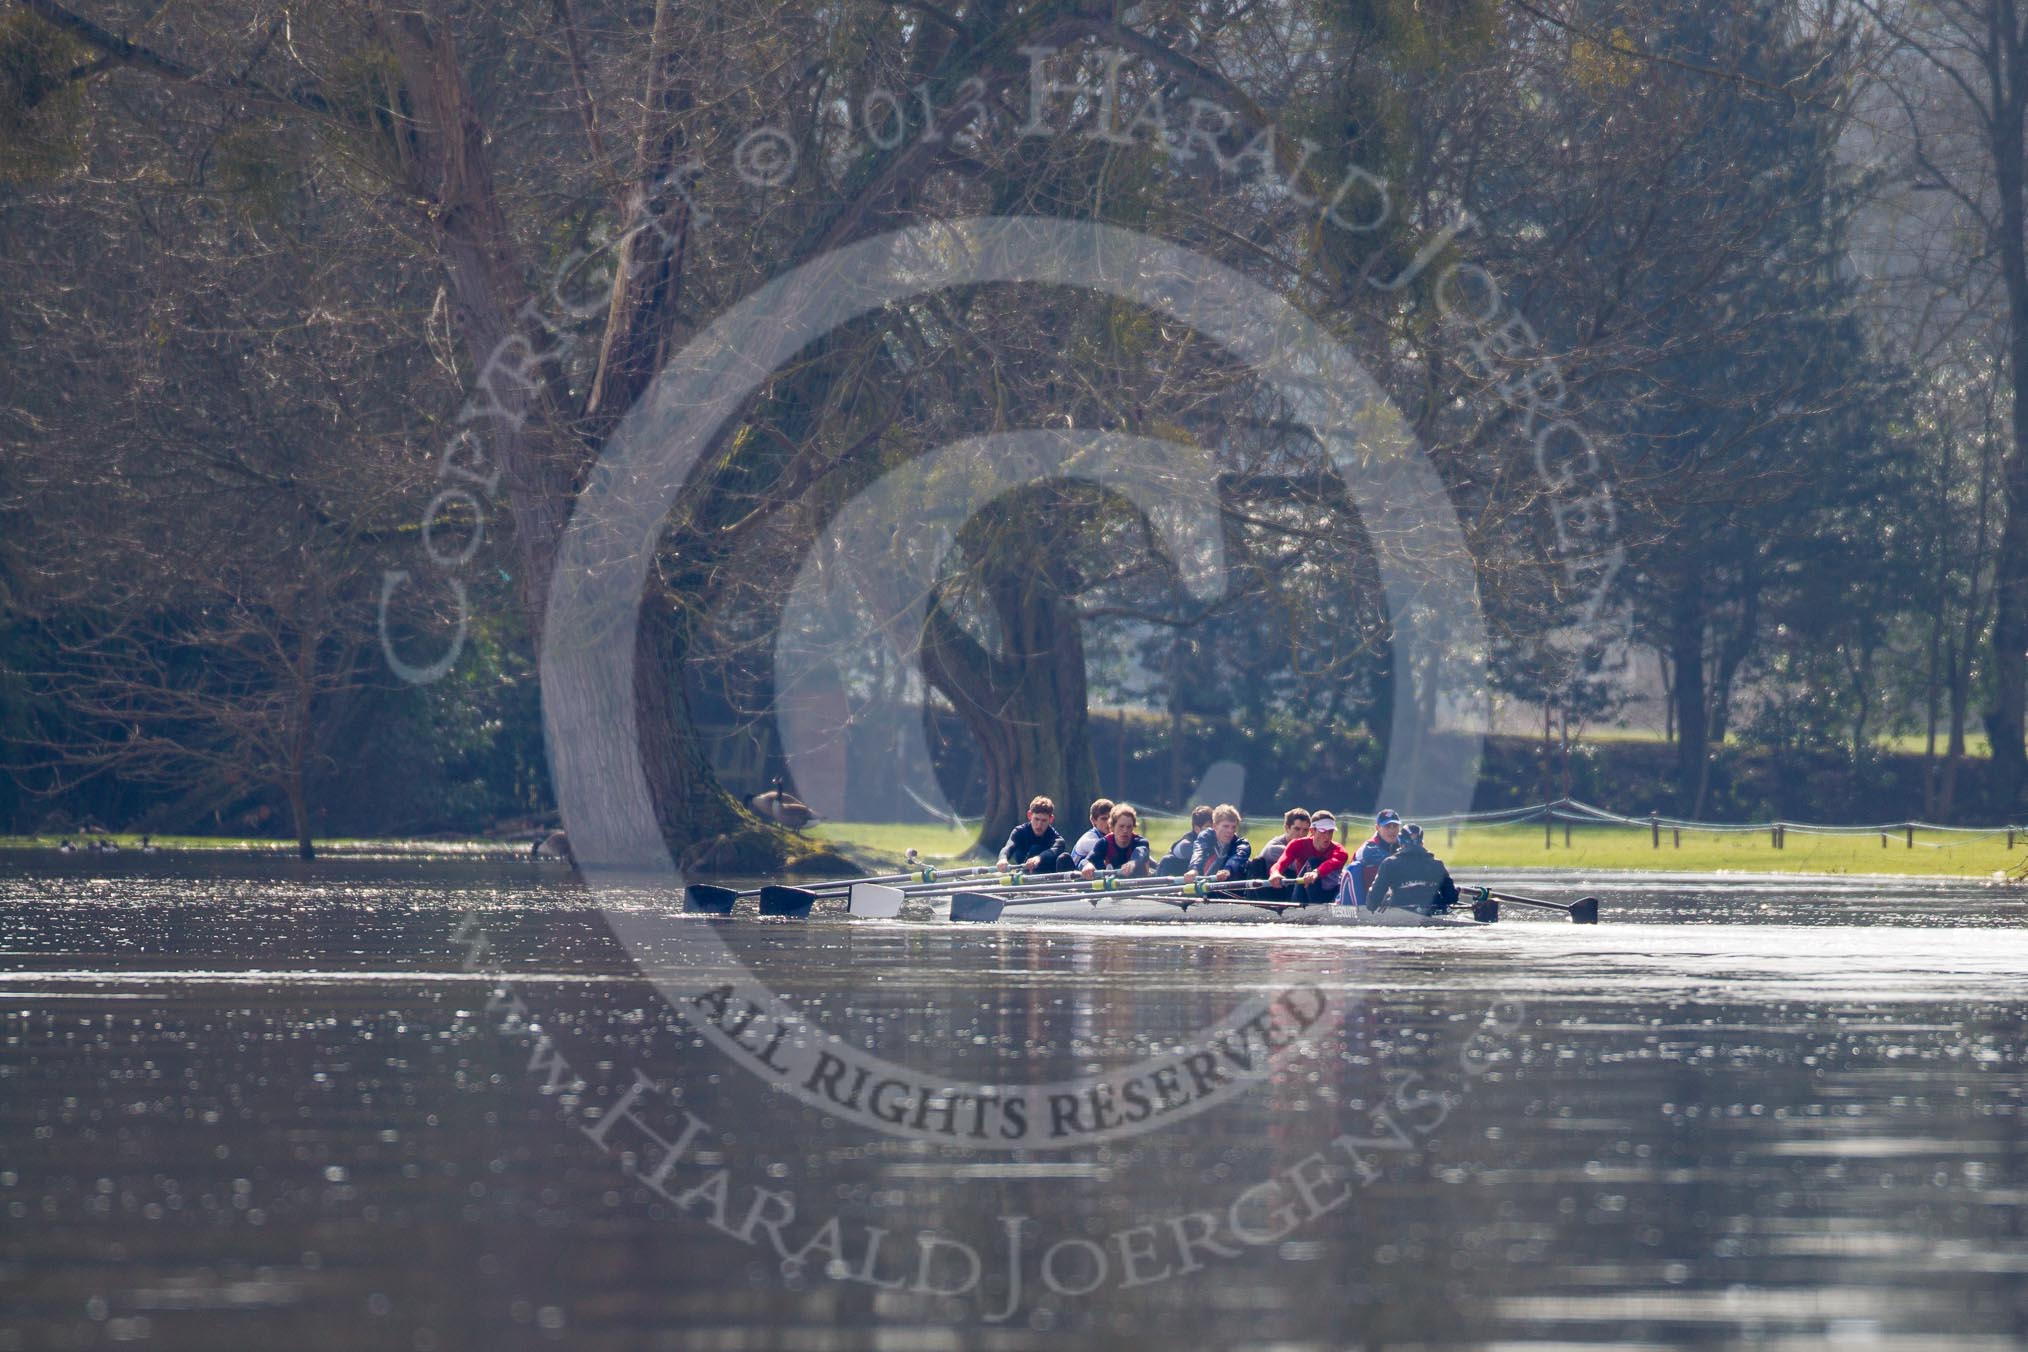 The Boat Race season 2013 - CUWBC training: The Oxford Lightweight boat returning to Henley-on-Thames before CUWBC start their scheduled training..
River Thames near Remenham,
Henley-on-Thames,
Oxfordshire,
United Kingdom,
on 19 March 2013 at 13:38, image #6